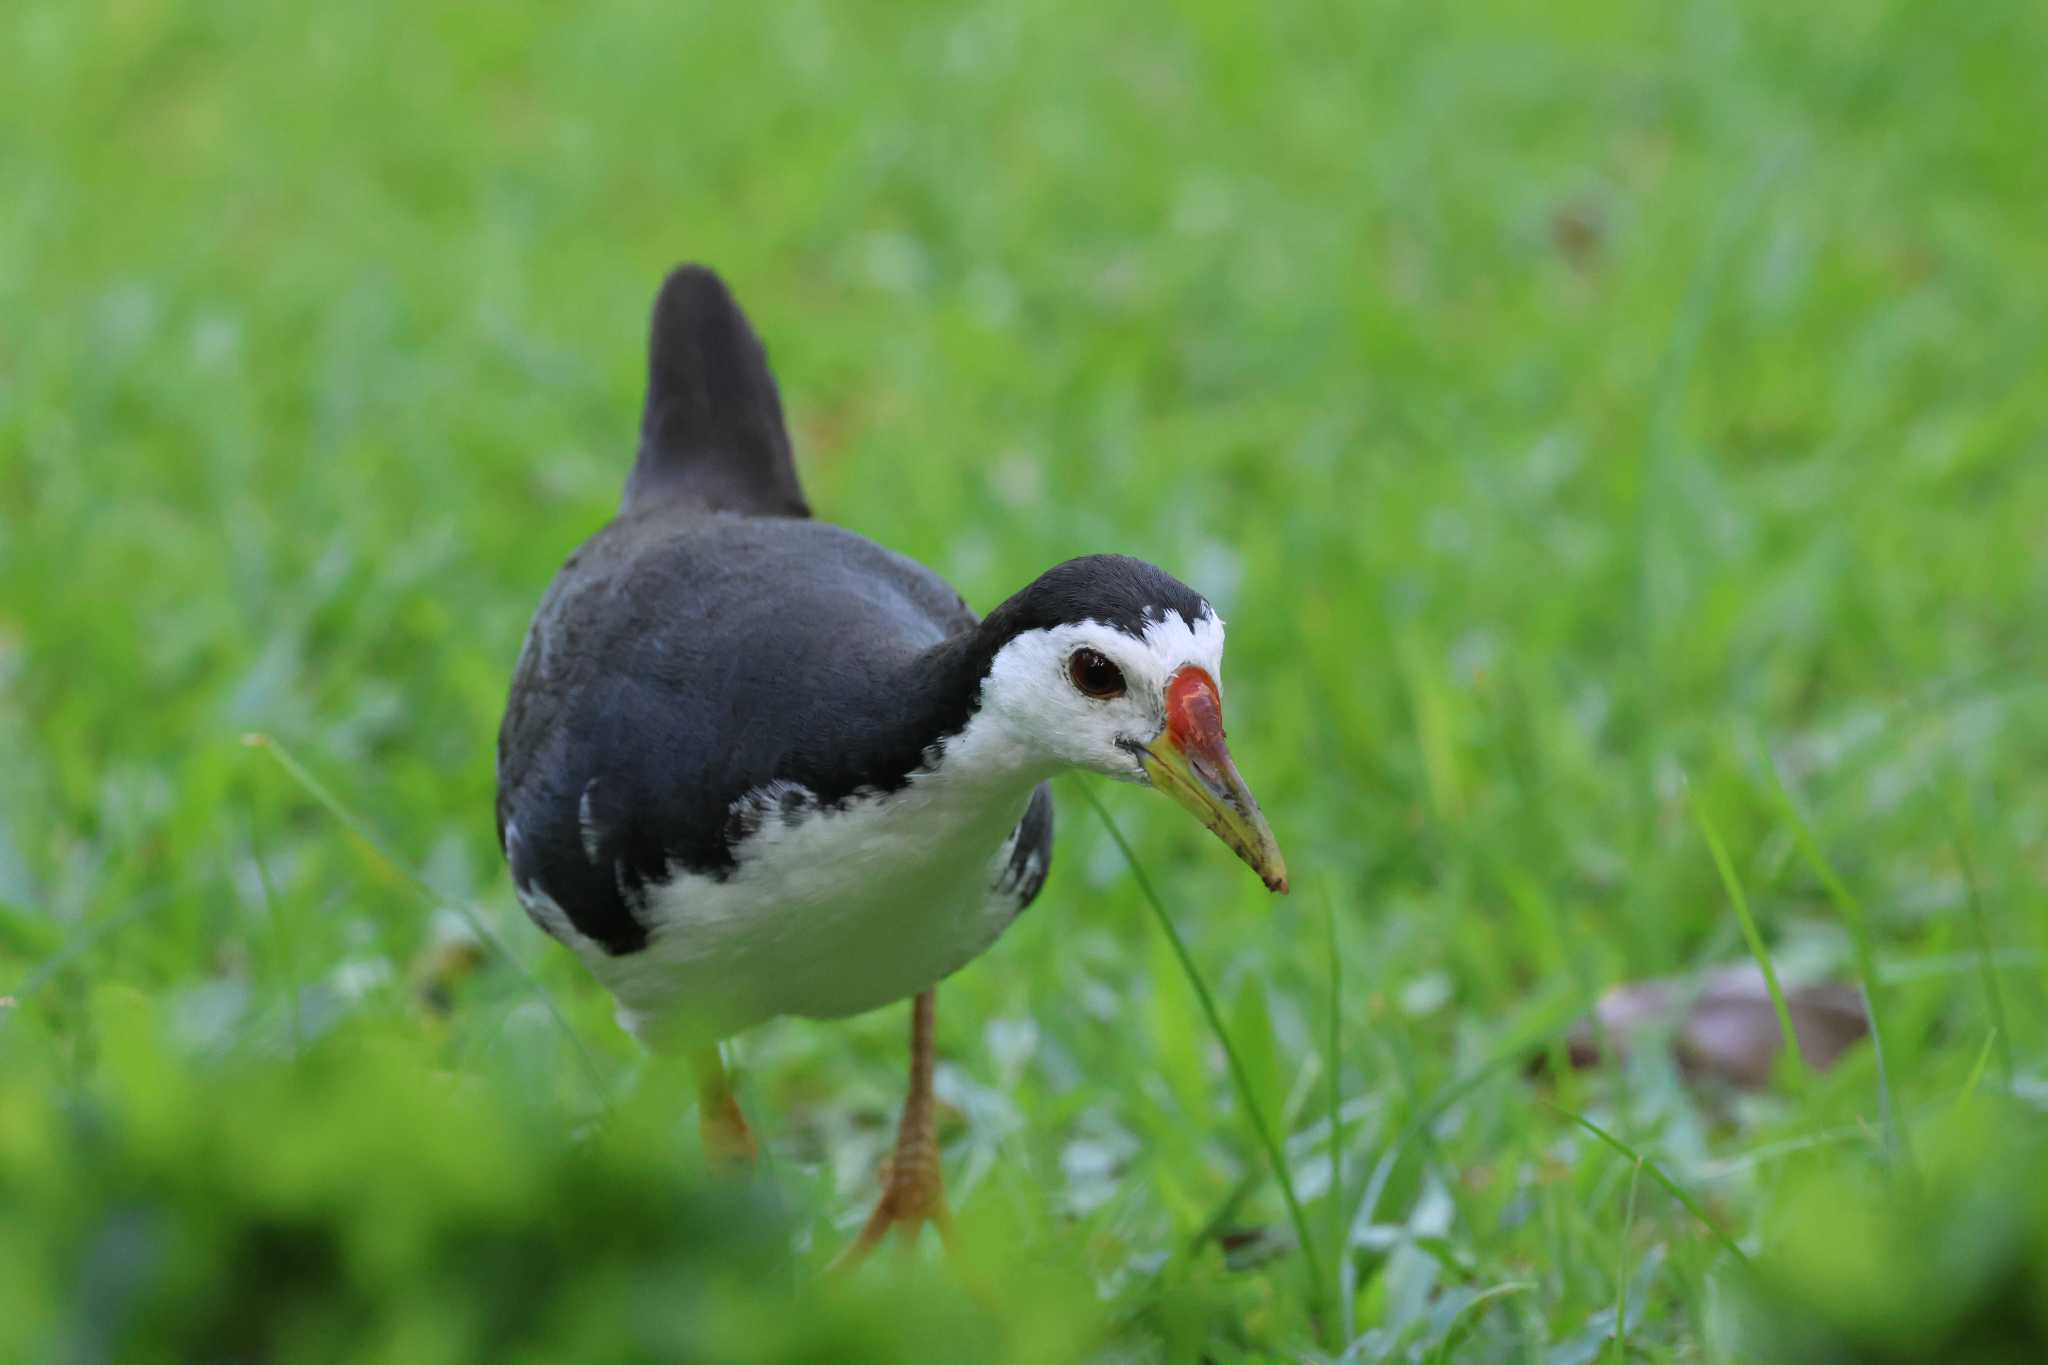 Photo of White-breasted Waterhen at Gardens by the Bay (Singapore) by ぼぼぼ